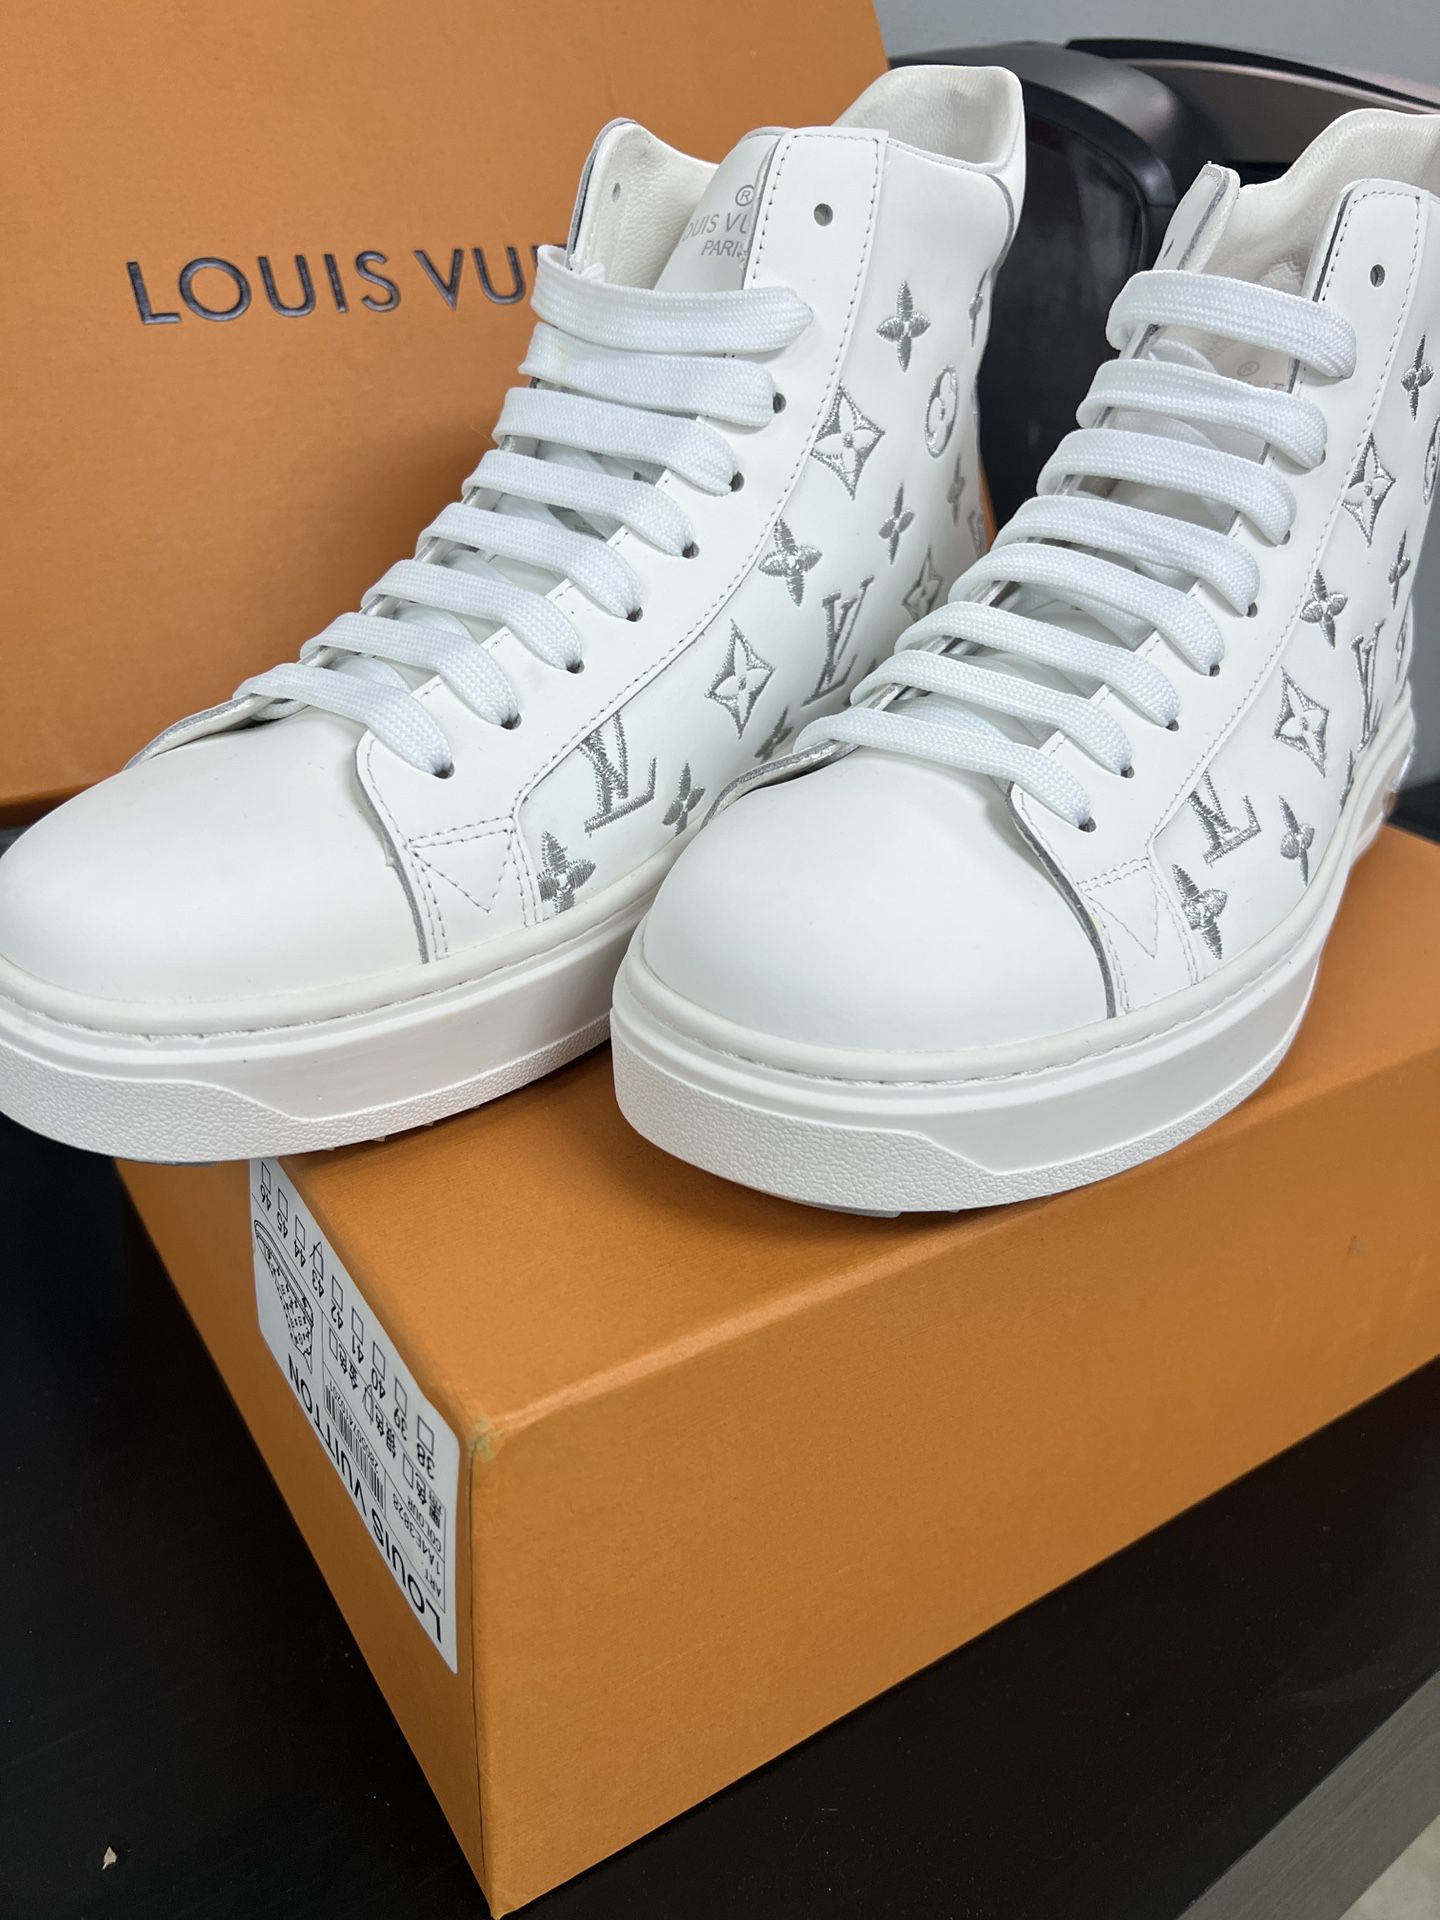 Louis Vuitton Boat Shoes for Sale in Rye, NY - OfferUp